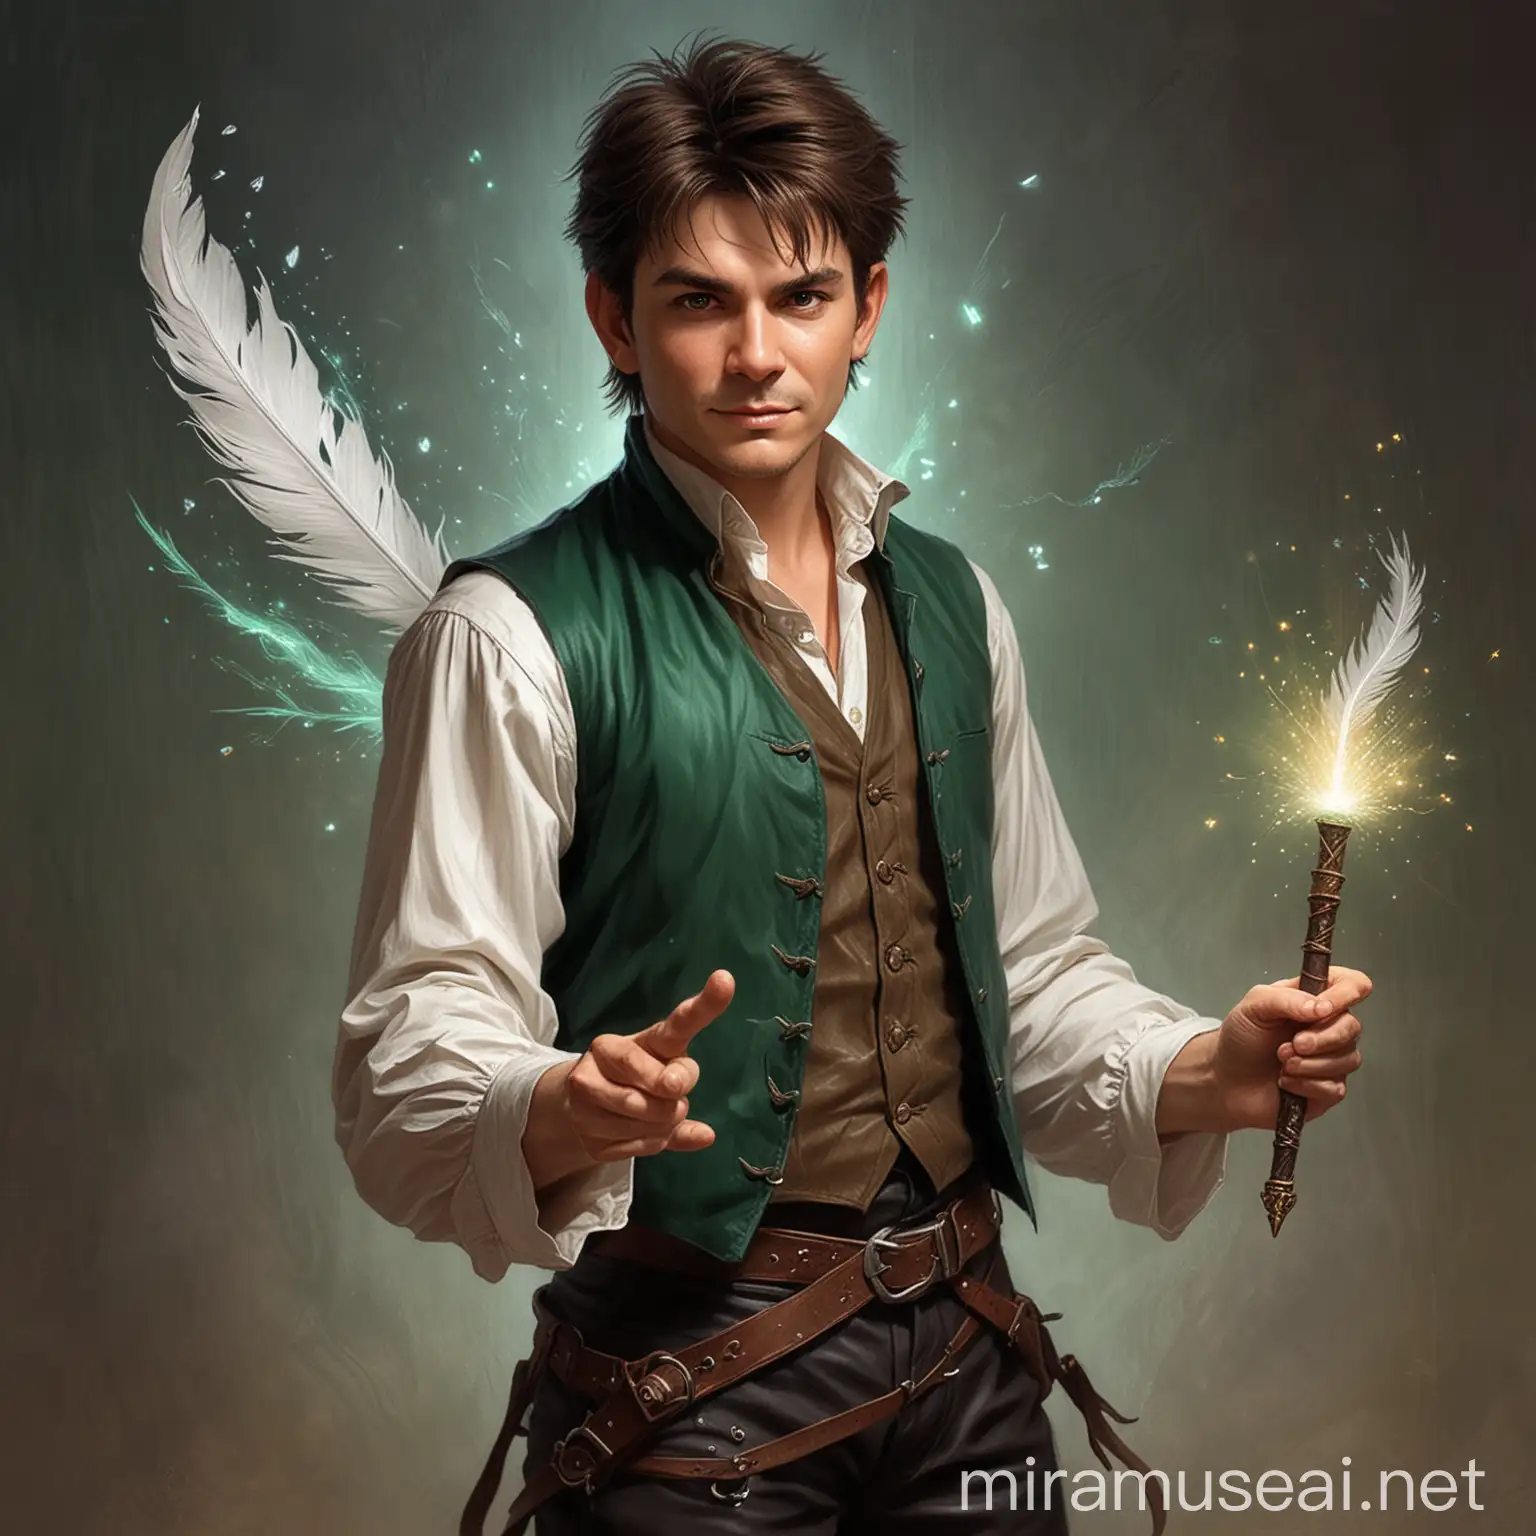 Cheerful Halfling Bard with Emerald Green Feather in Magical Dungeons Dragons Setting